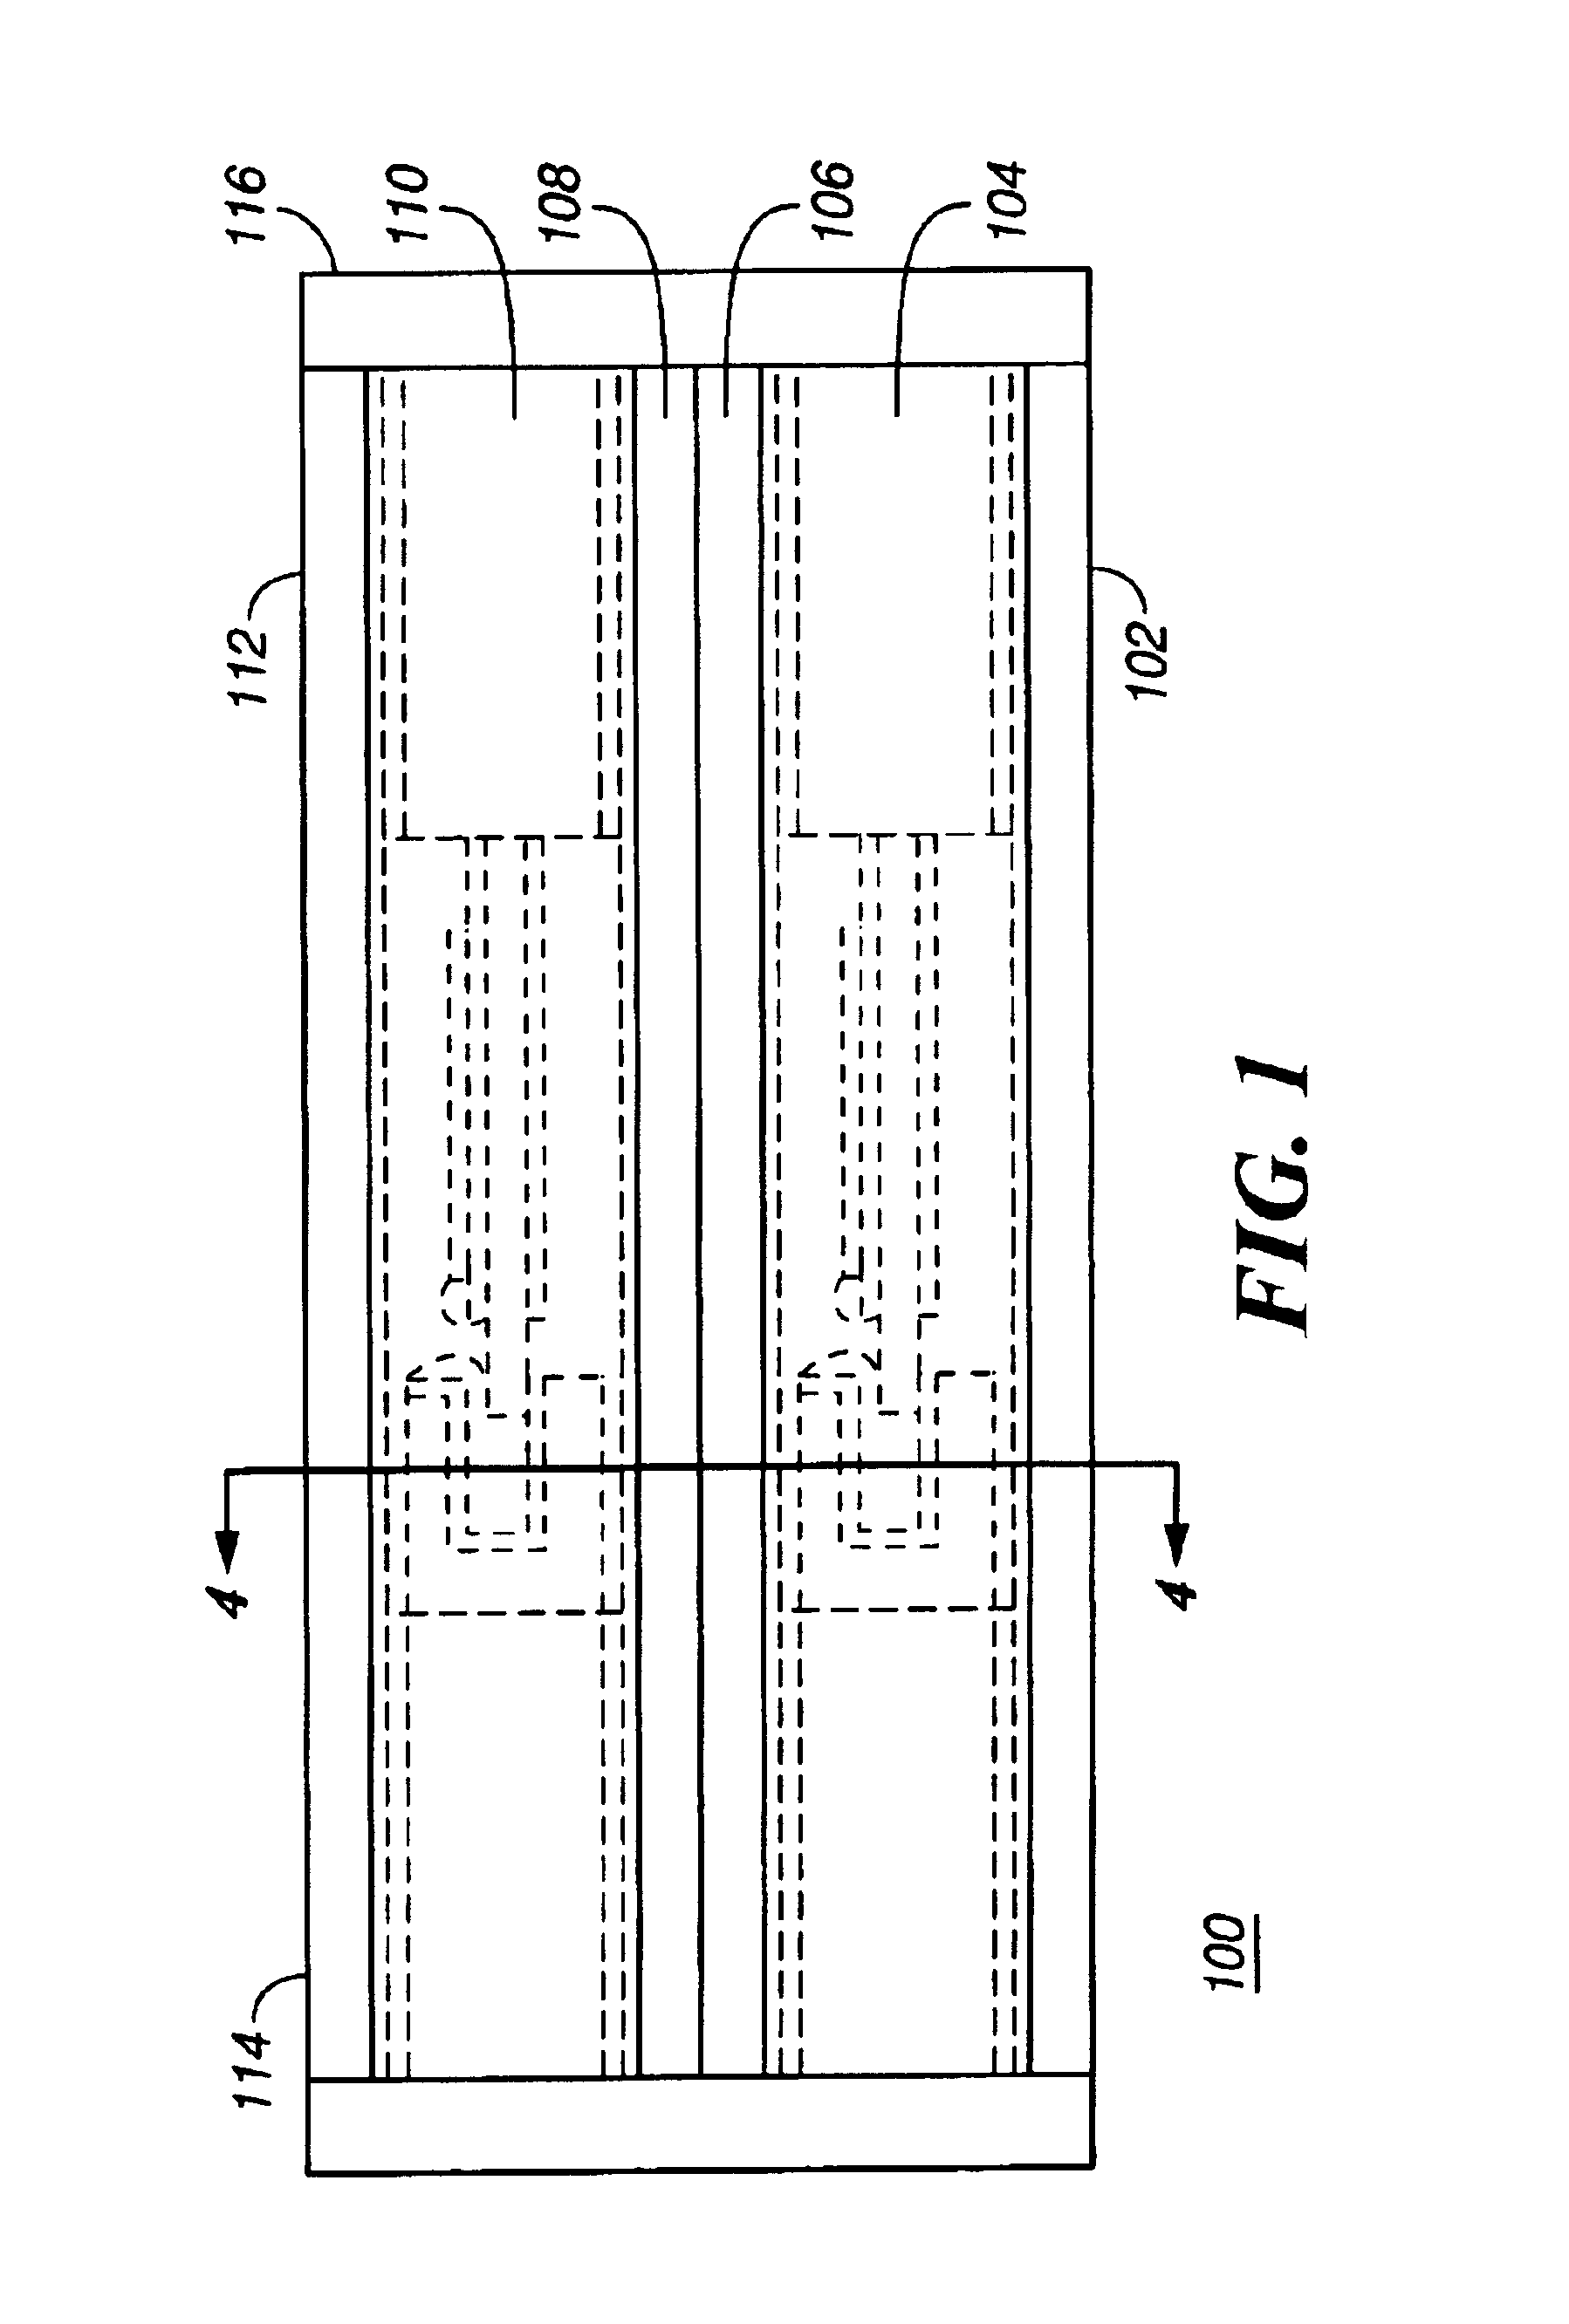 Insertion-type liquid metal latching relay array